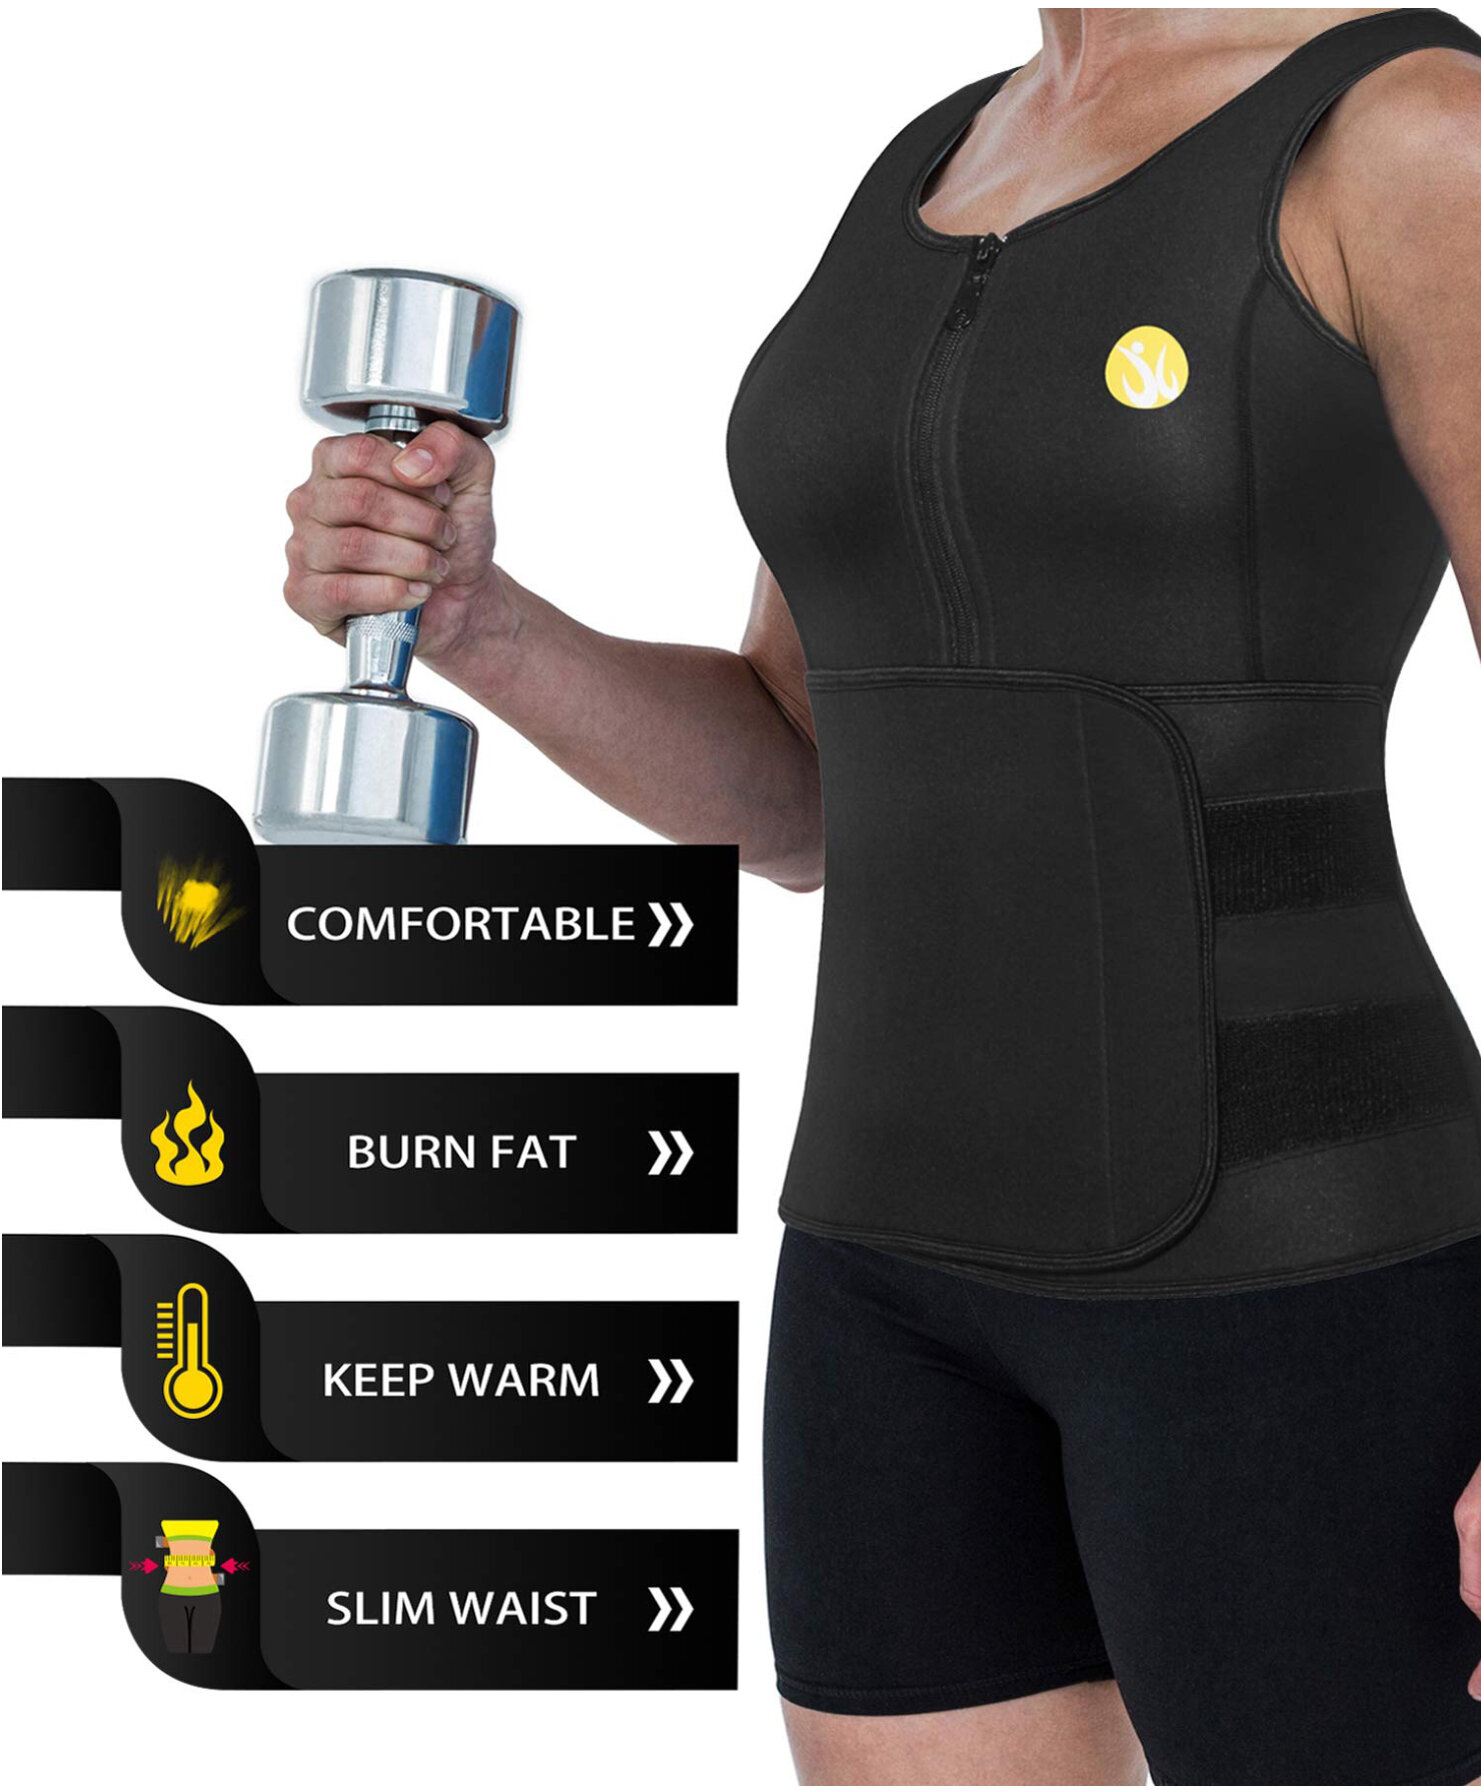 HOT SHAPERS Cami Hot with Waist Trainer – Women's Slimming